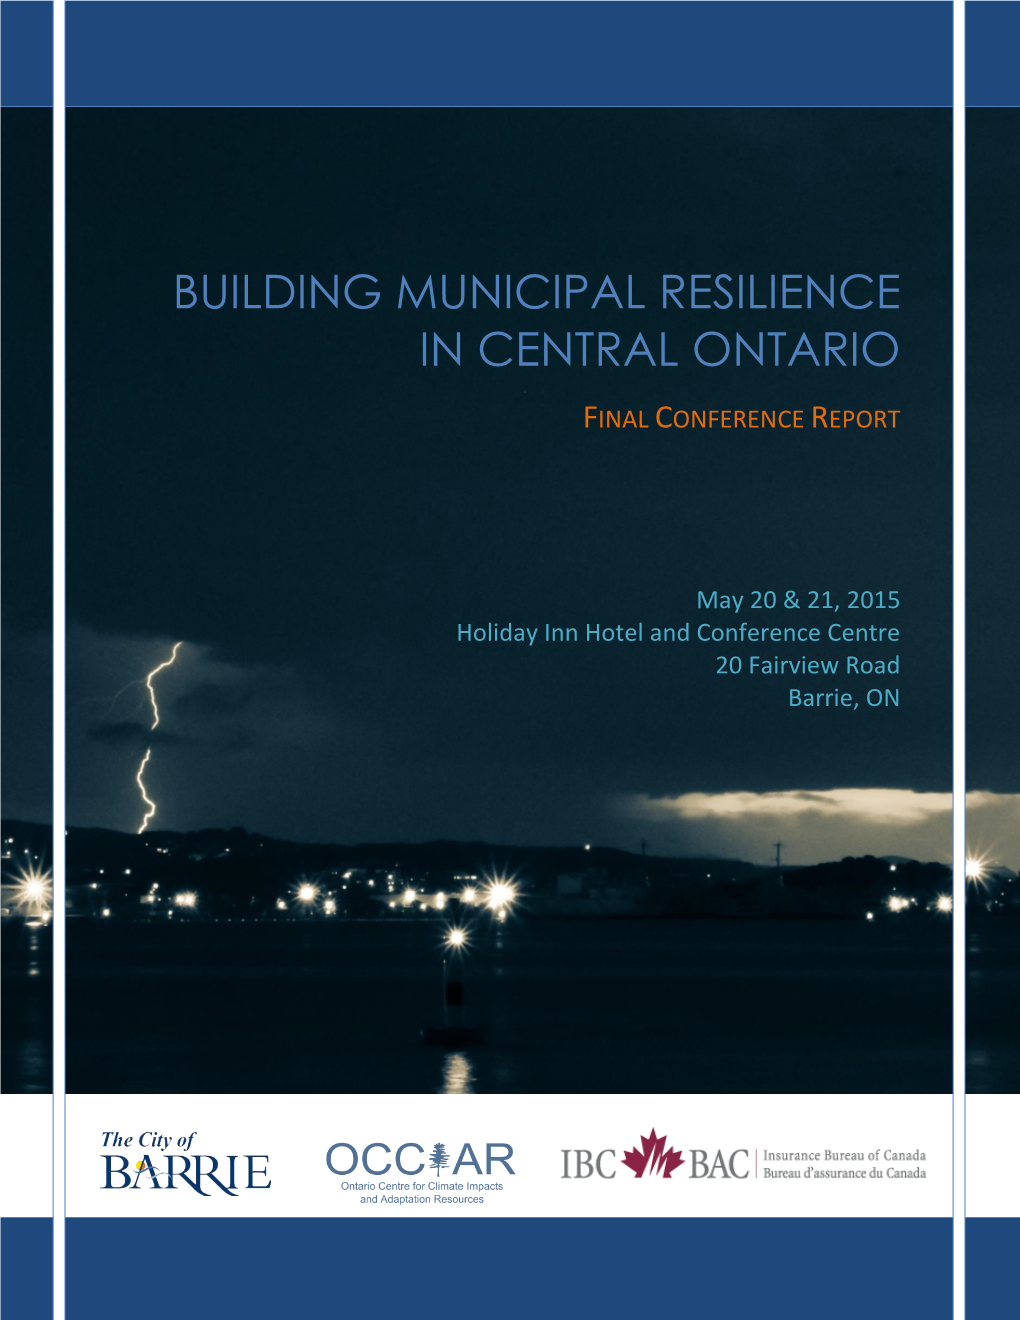 Building Municipal Resilience in Central Ontario